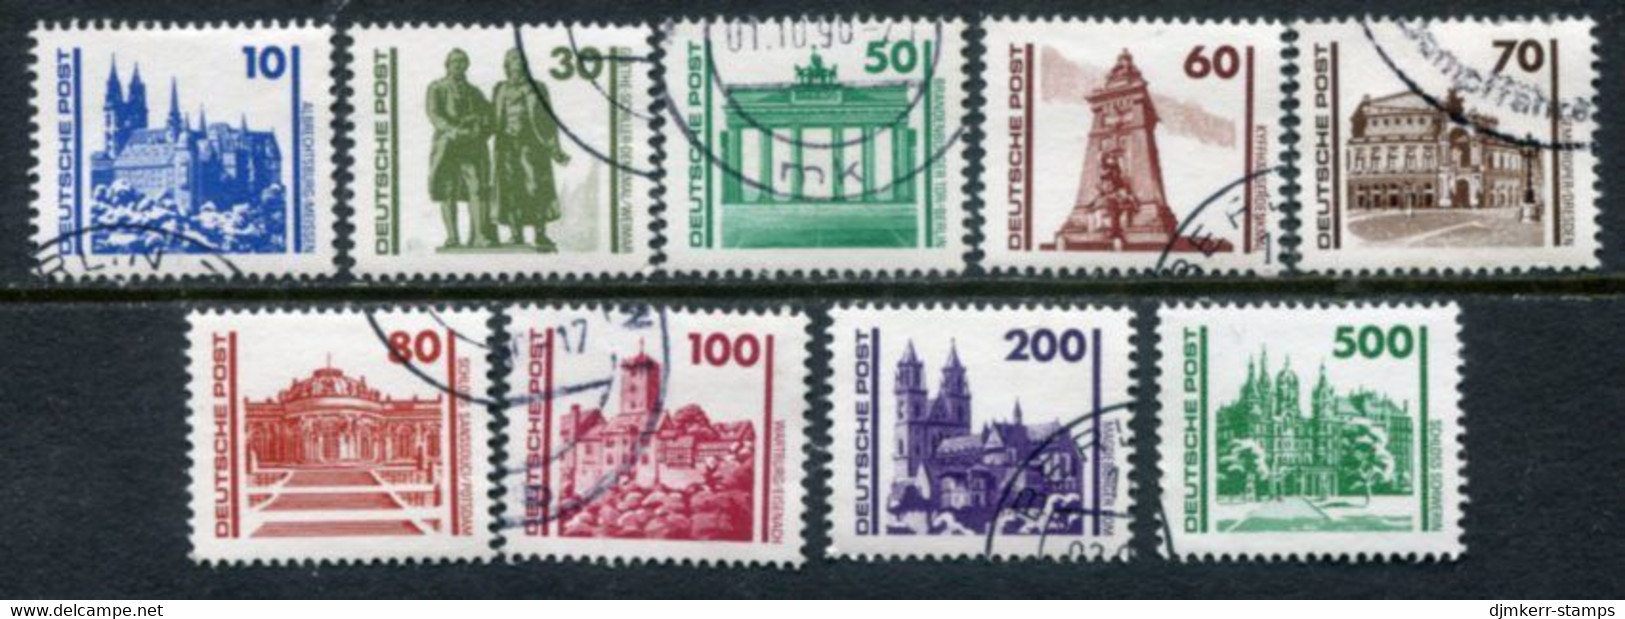 DDR 1990 Buildings And Monuments Definitive Used.  Michel 3344-52 - Gebruikt